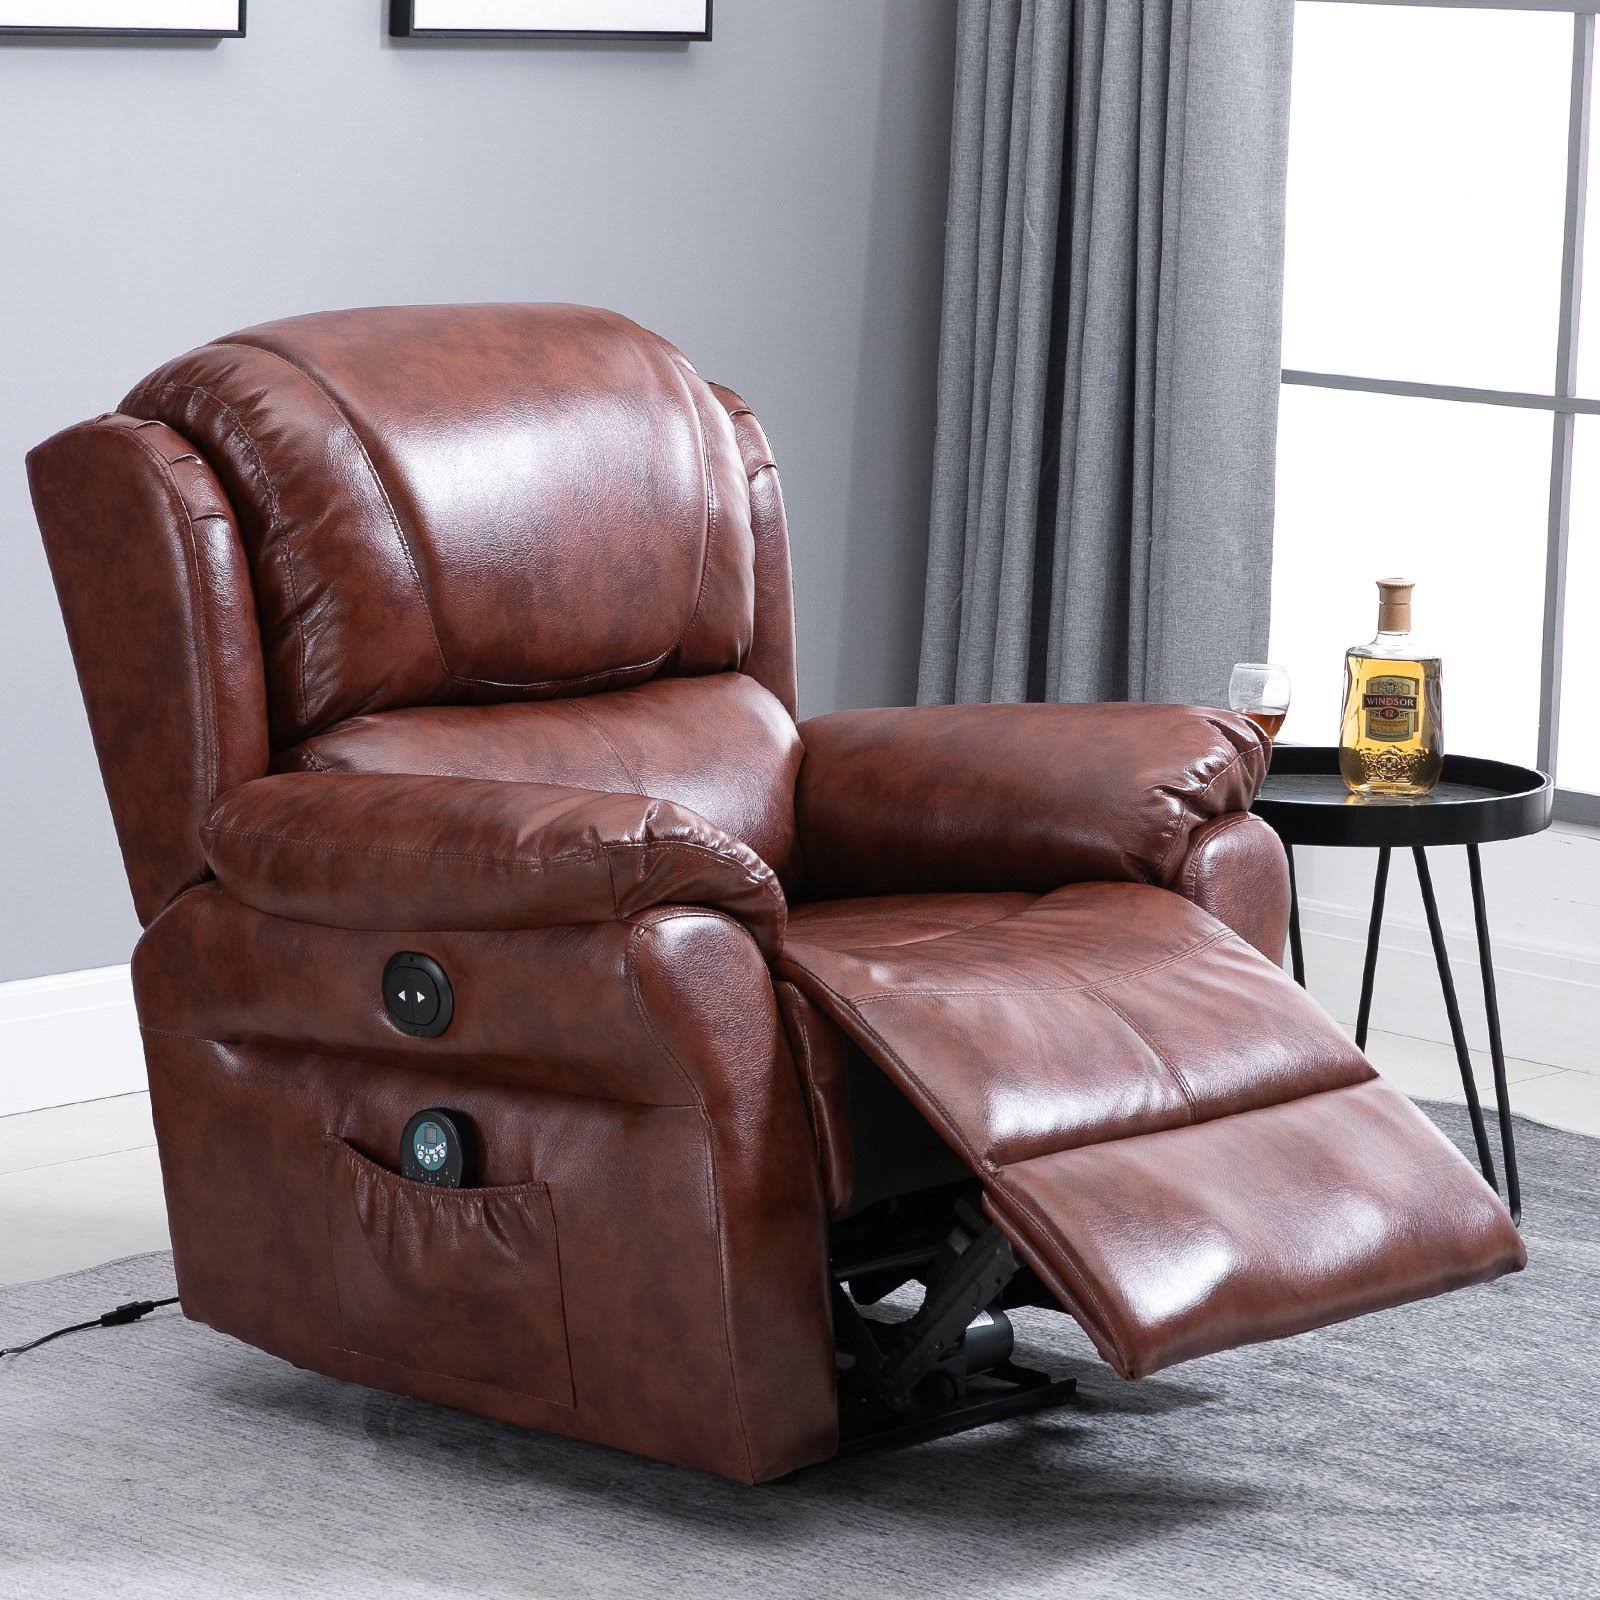 Homcom Power Massage Recliner Chair With Heat And Remote Control 8 Massaging Points Pu Leather